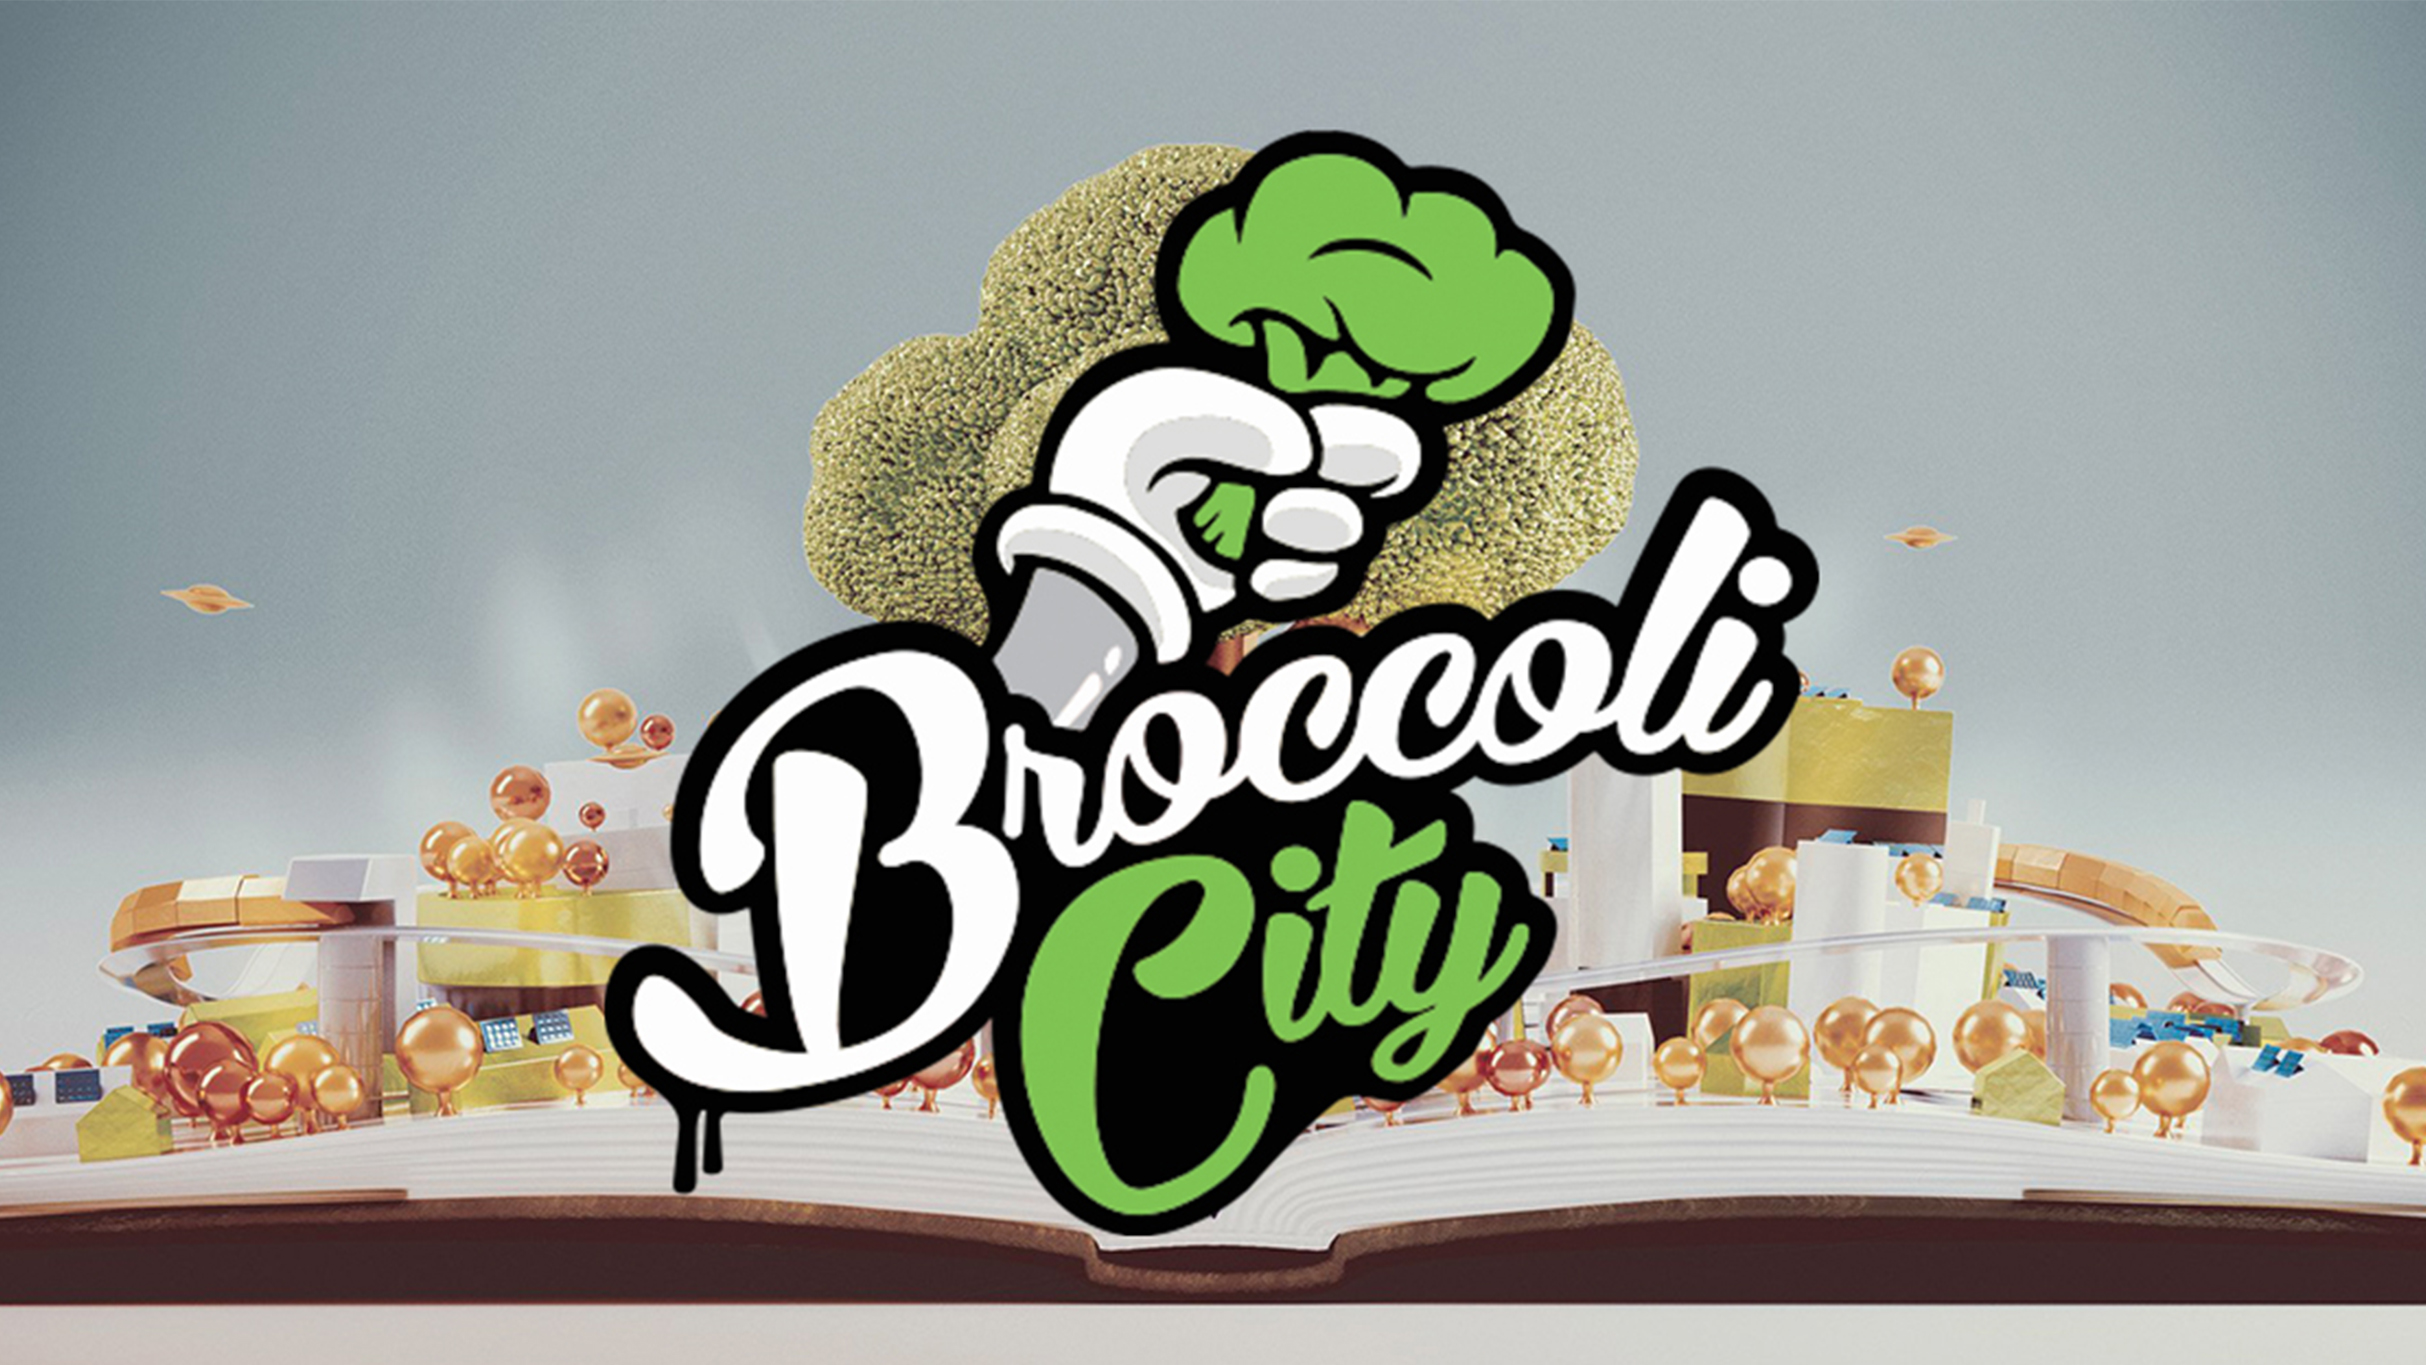 Broccoli City Fest Returns for 2021 with Performances by Lil Baby, Snoh